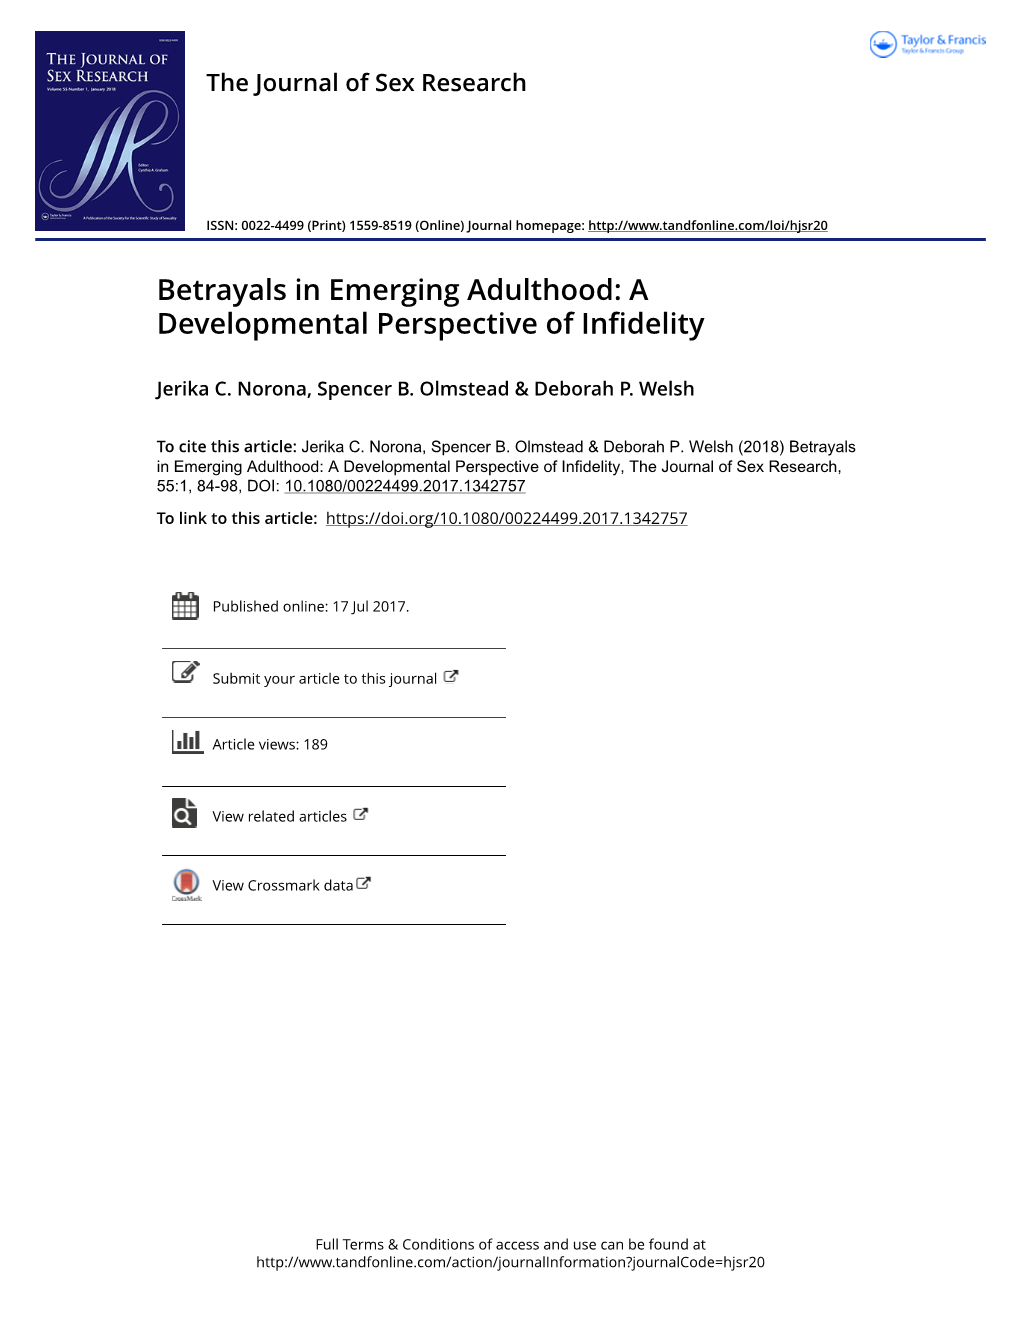 Betrayals in Emerging Adulthood: a Developmental Perspective of Infidelity